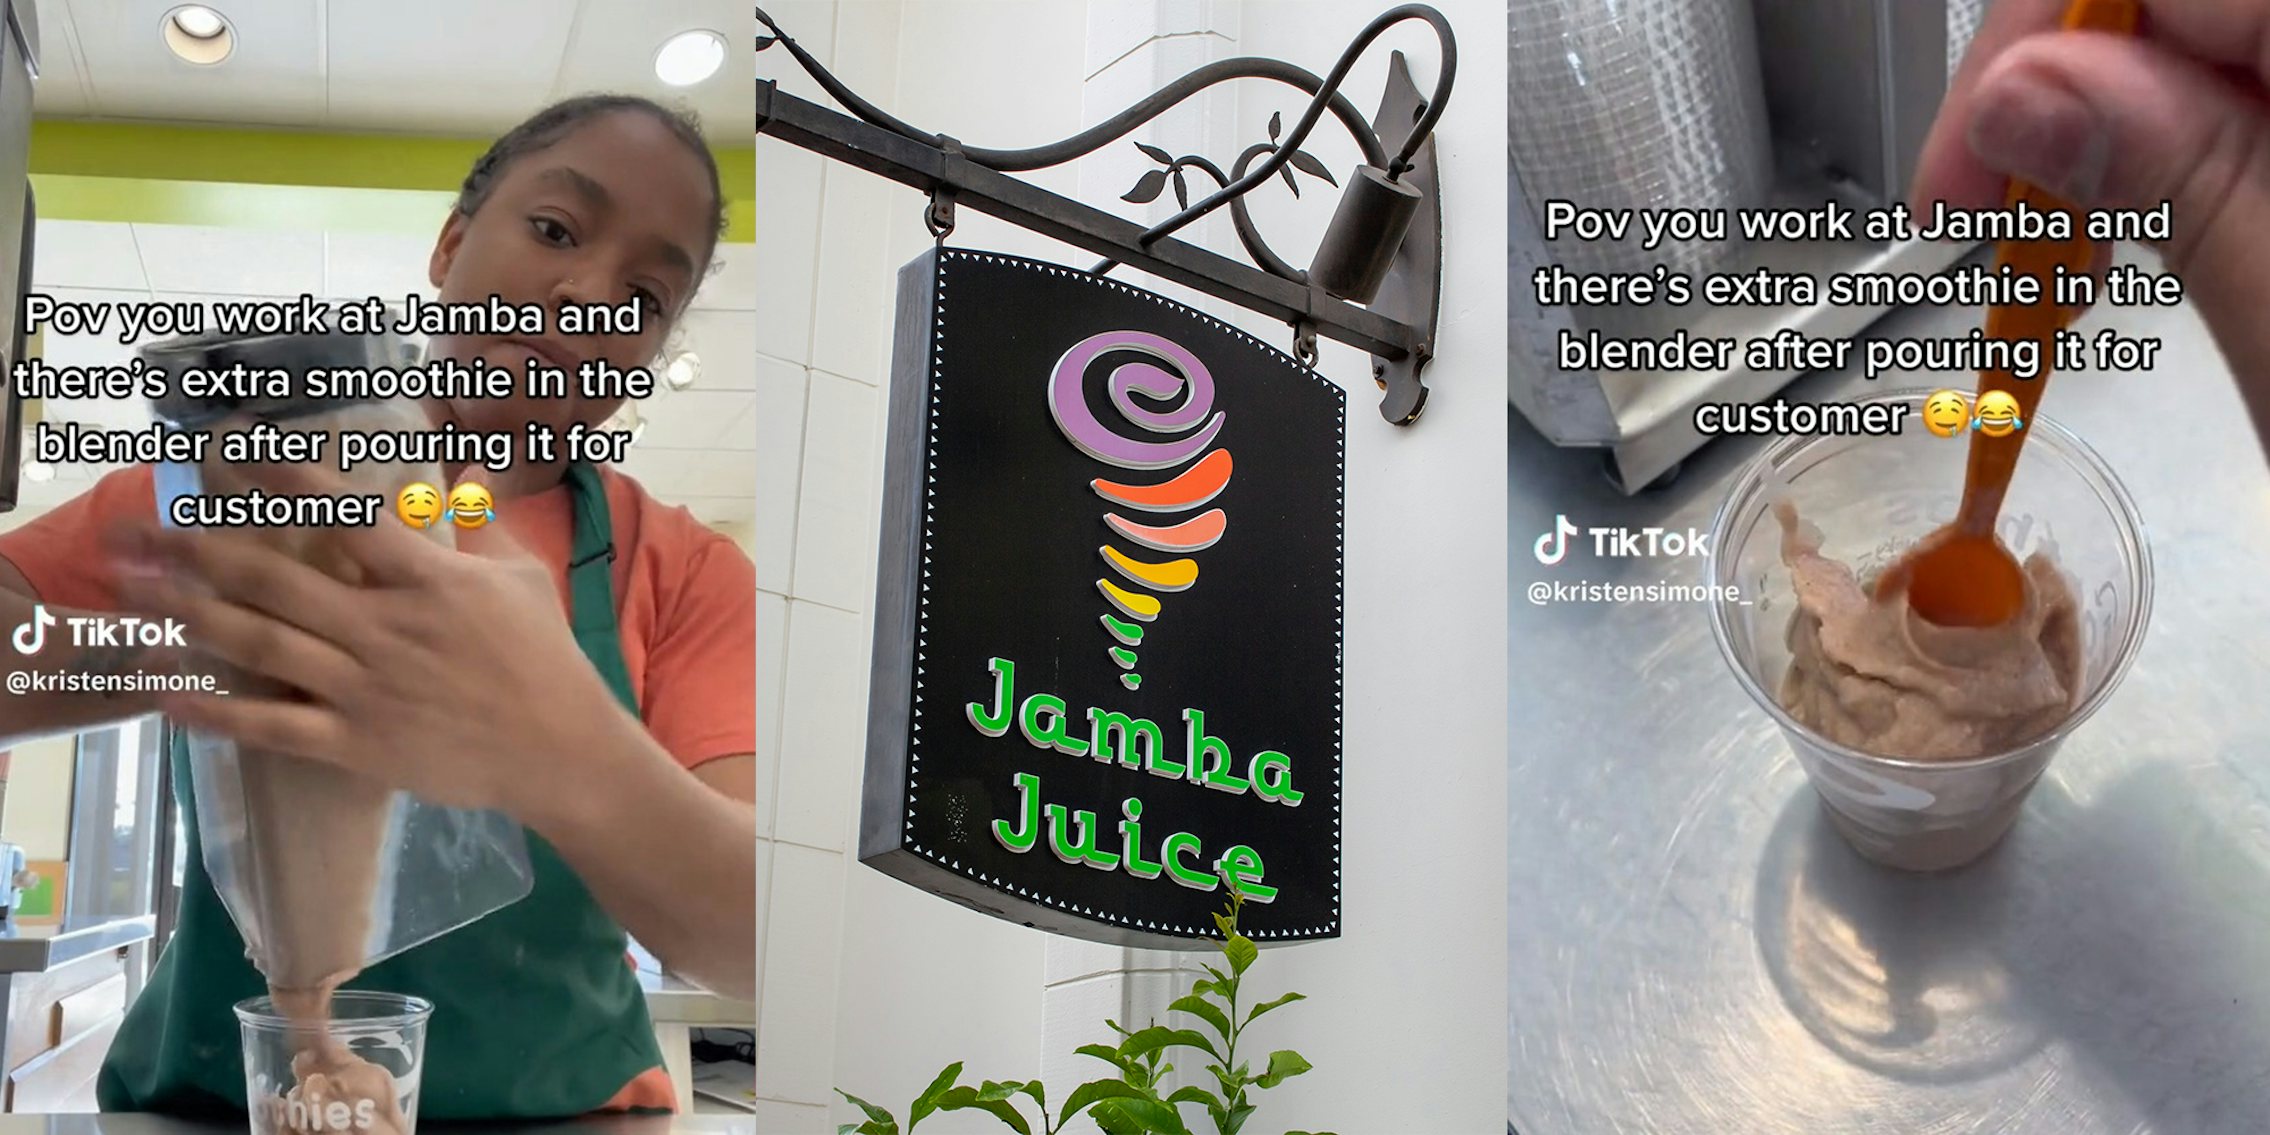 Jamba worker shares leftover shakes they eat all day as a server.